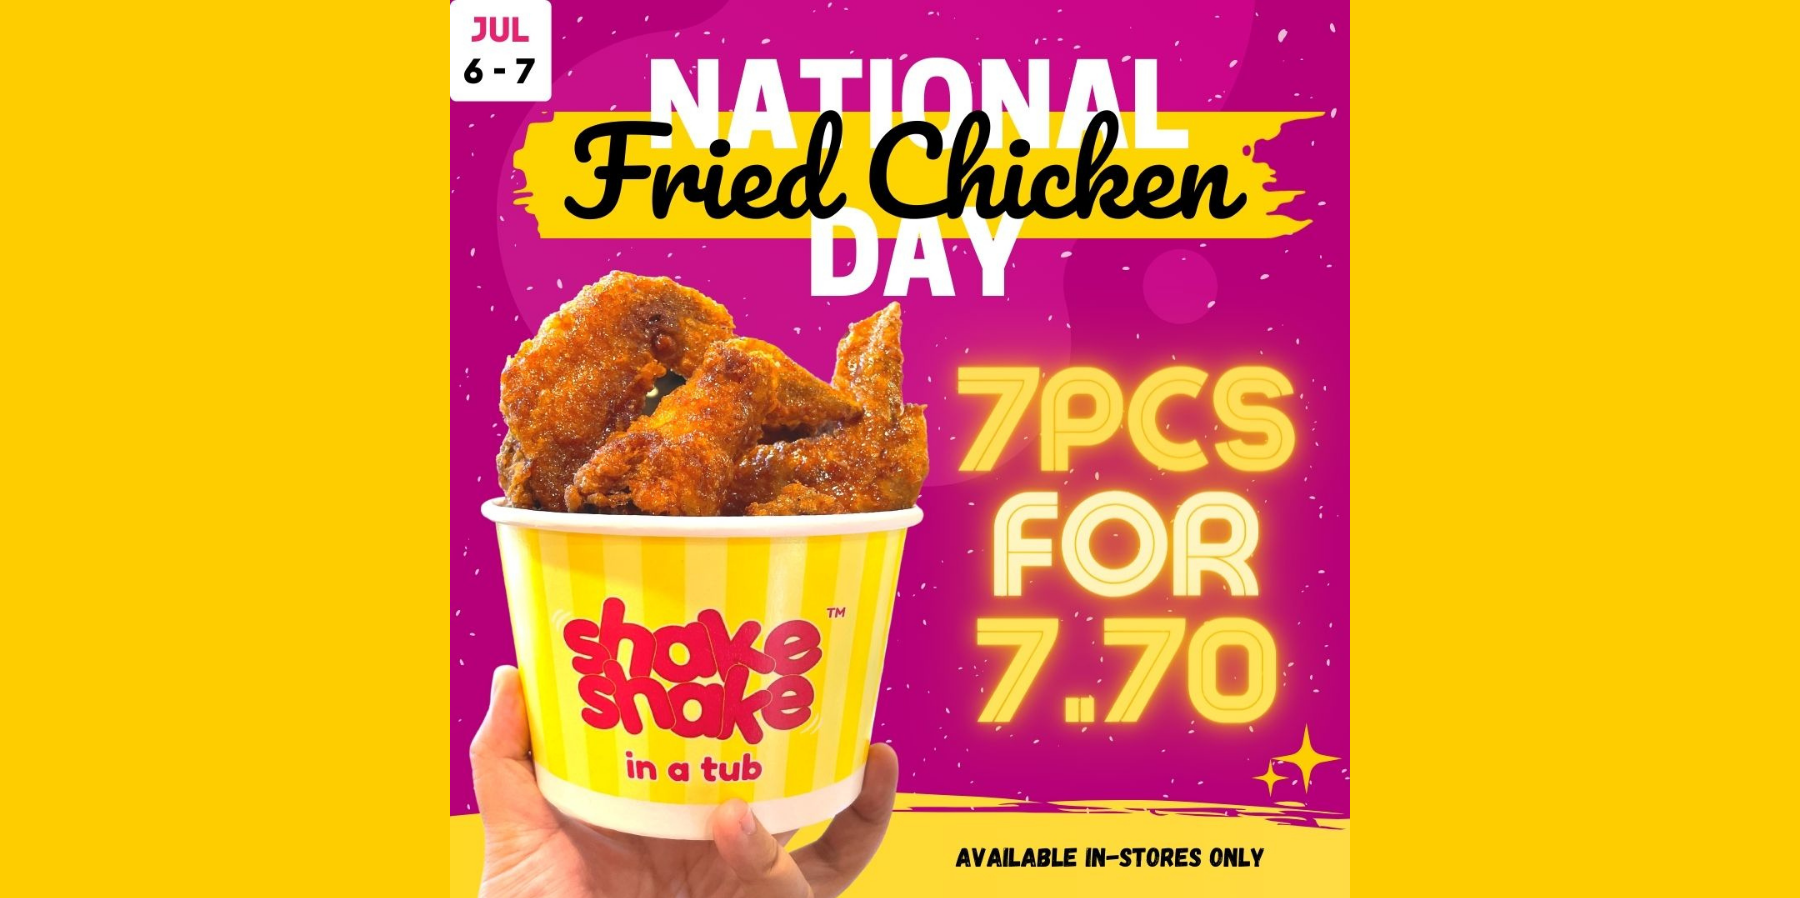 7 Pieces of Fried Chicken Wings for only $7.70 at Shake Shake In The Tub!